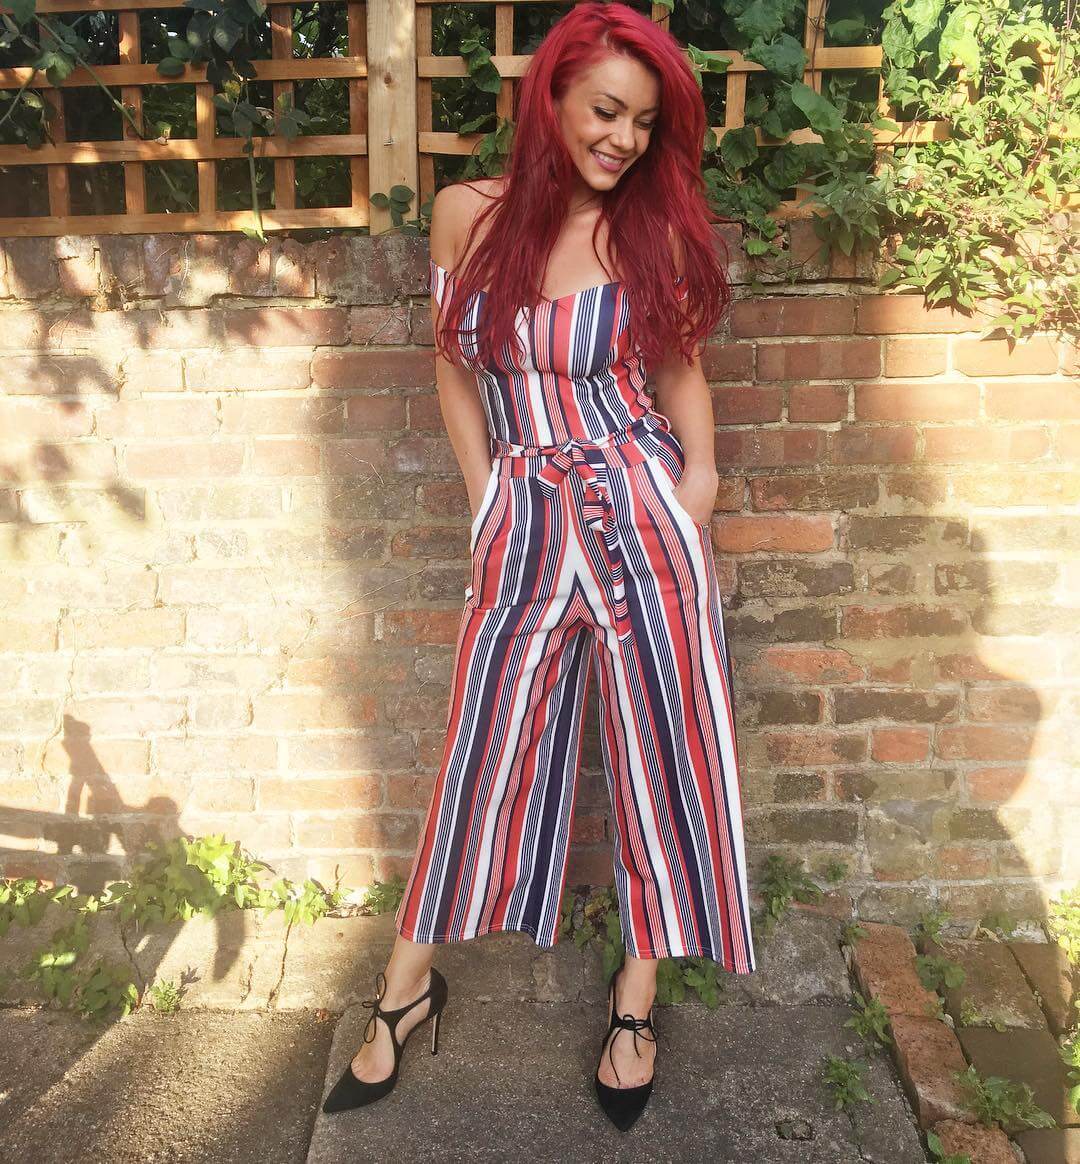 49 Hottest Dianne Buswell Bikini Pictures Are Portal To Heaven | Best Of Comic Books